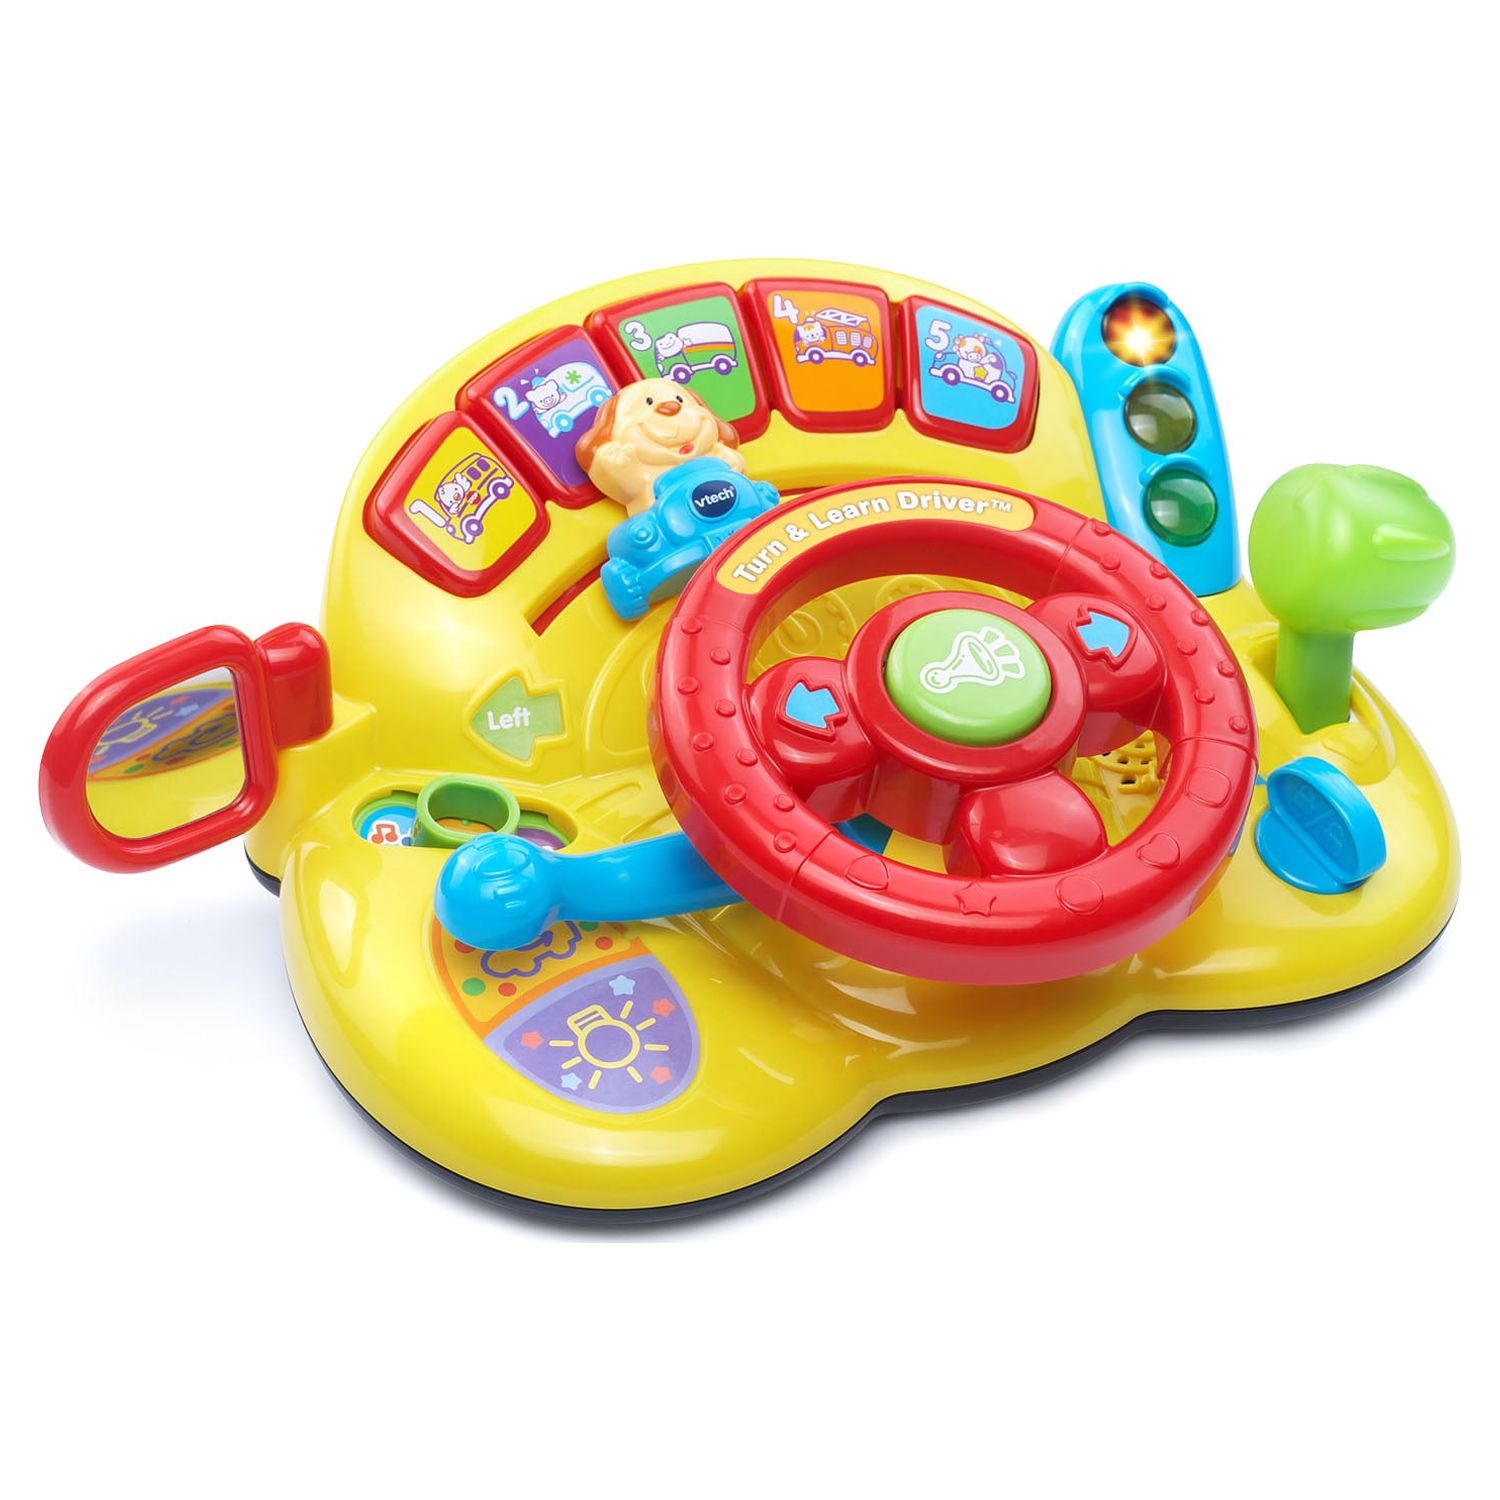 VTech Turn and Learn Driver, Role-Play Toy for Baby, Teaches Animals, Colors - image 1 of 8